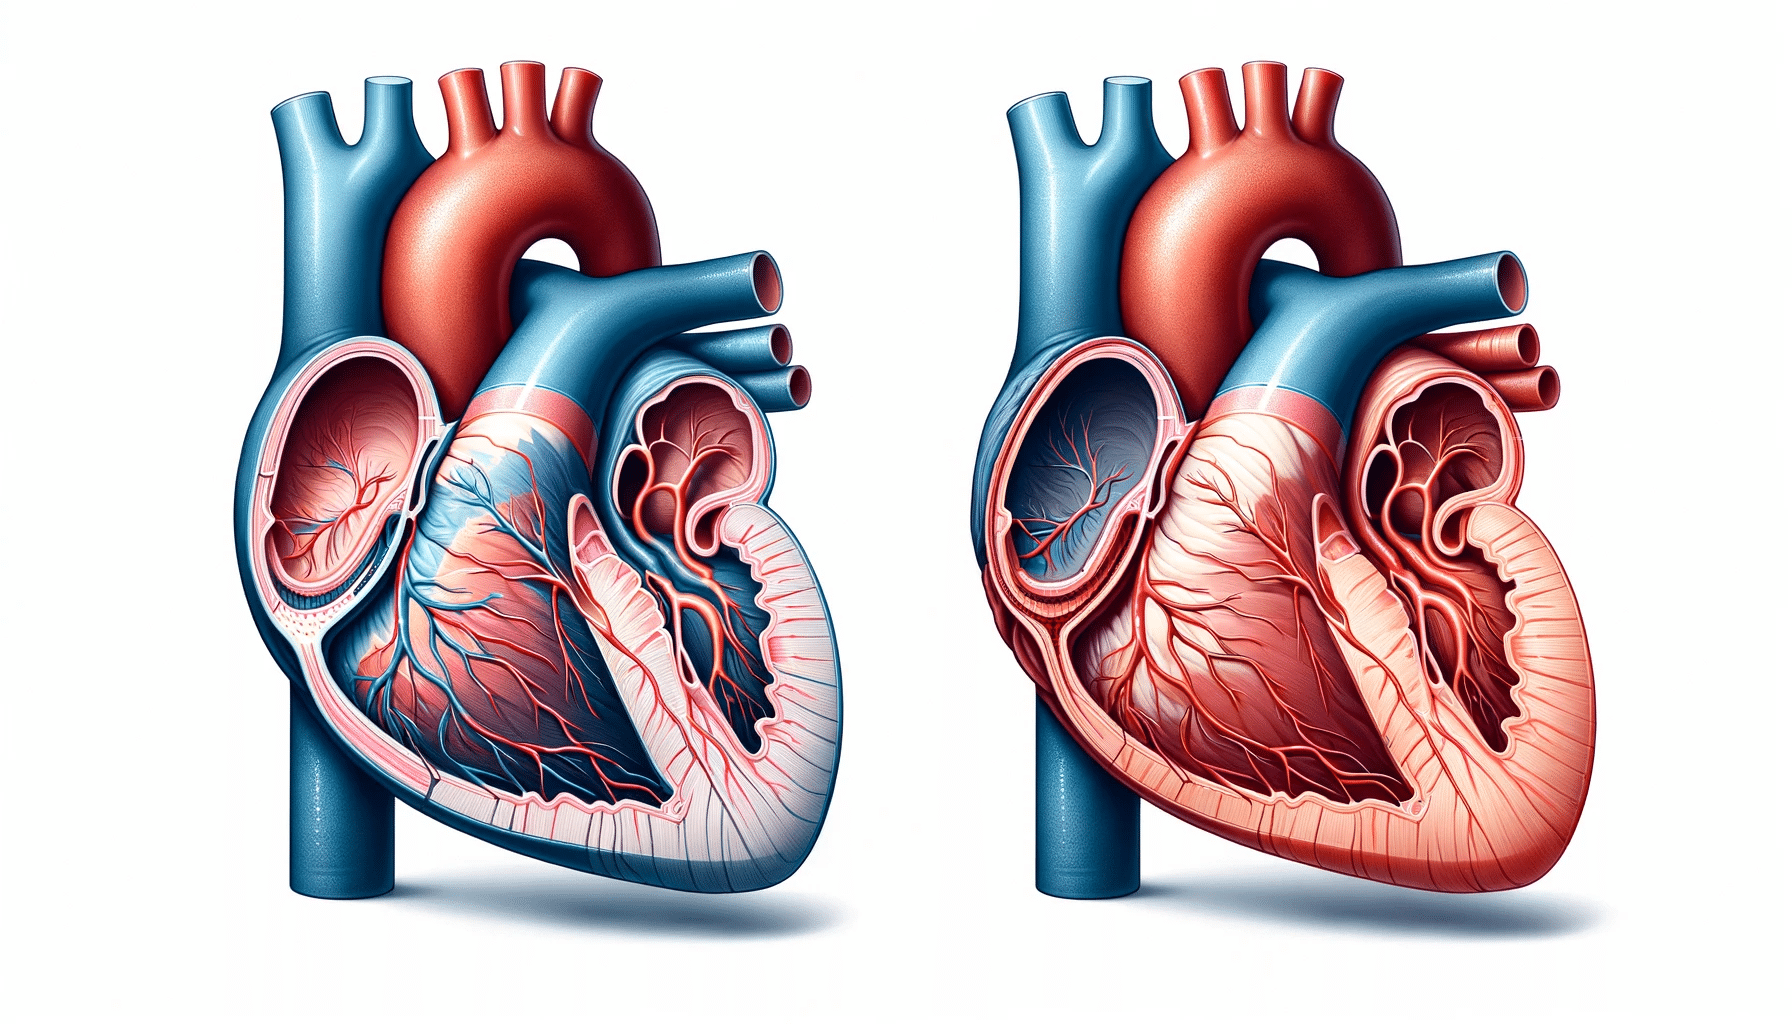 Create a horizontal detailed medical illustration comparing a normal heart to one with ventricular hypertrophy without any labels or text. The image